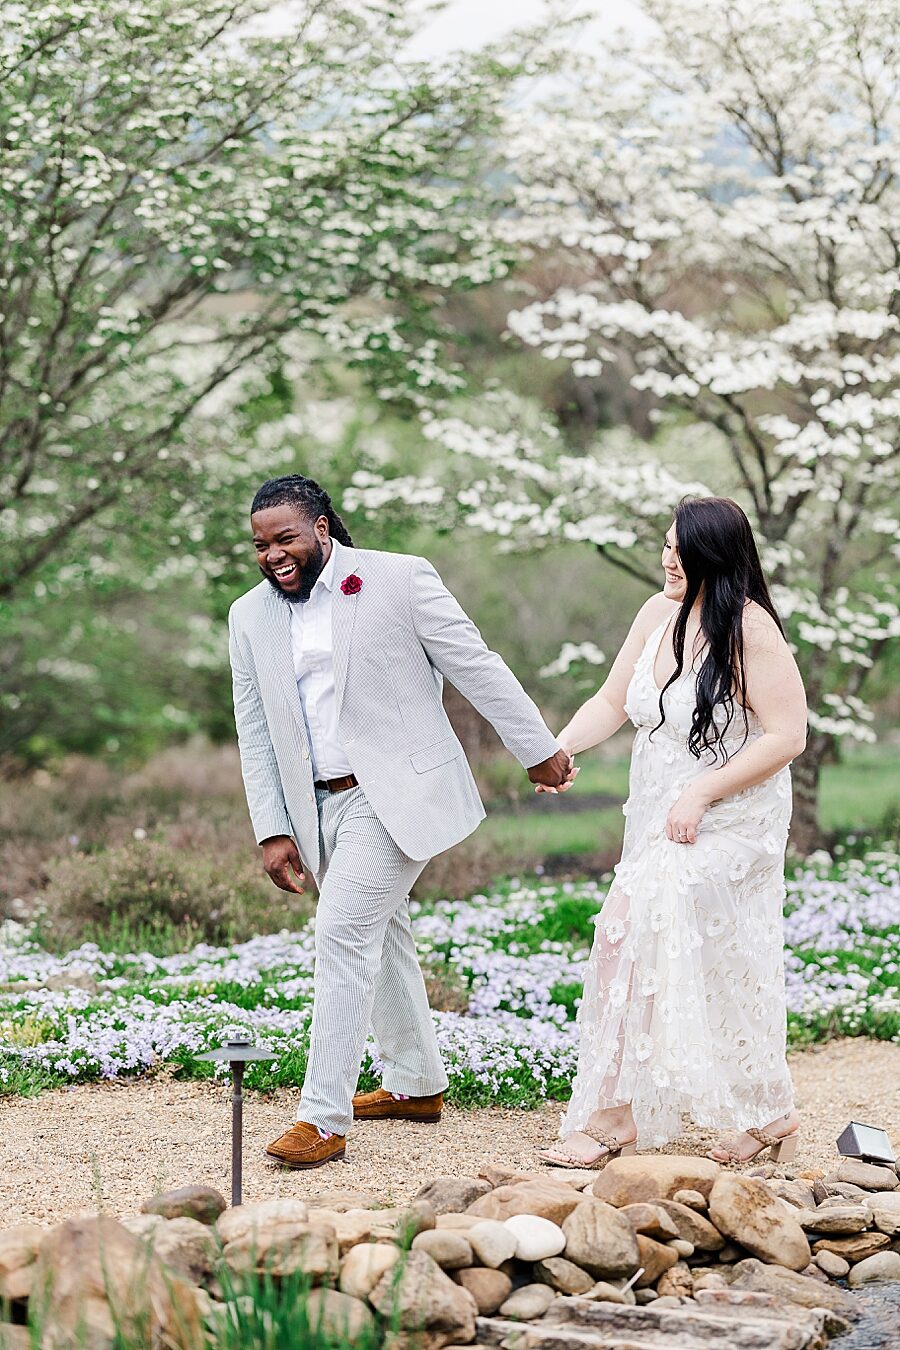 Walking together at Garden Engagement Session by Amanda May Photos